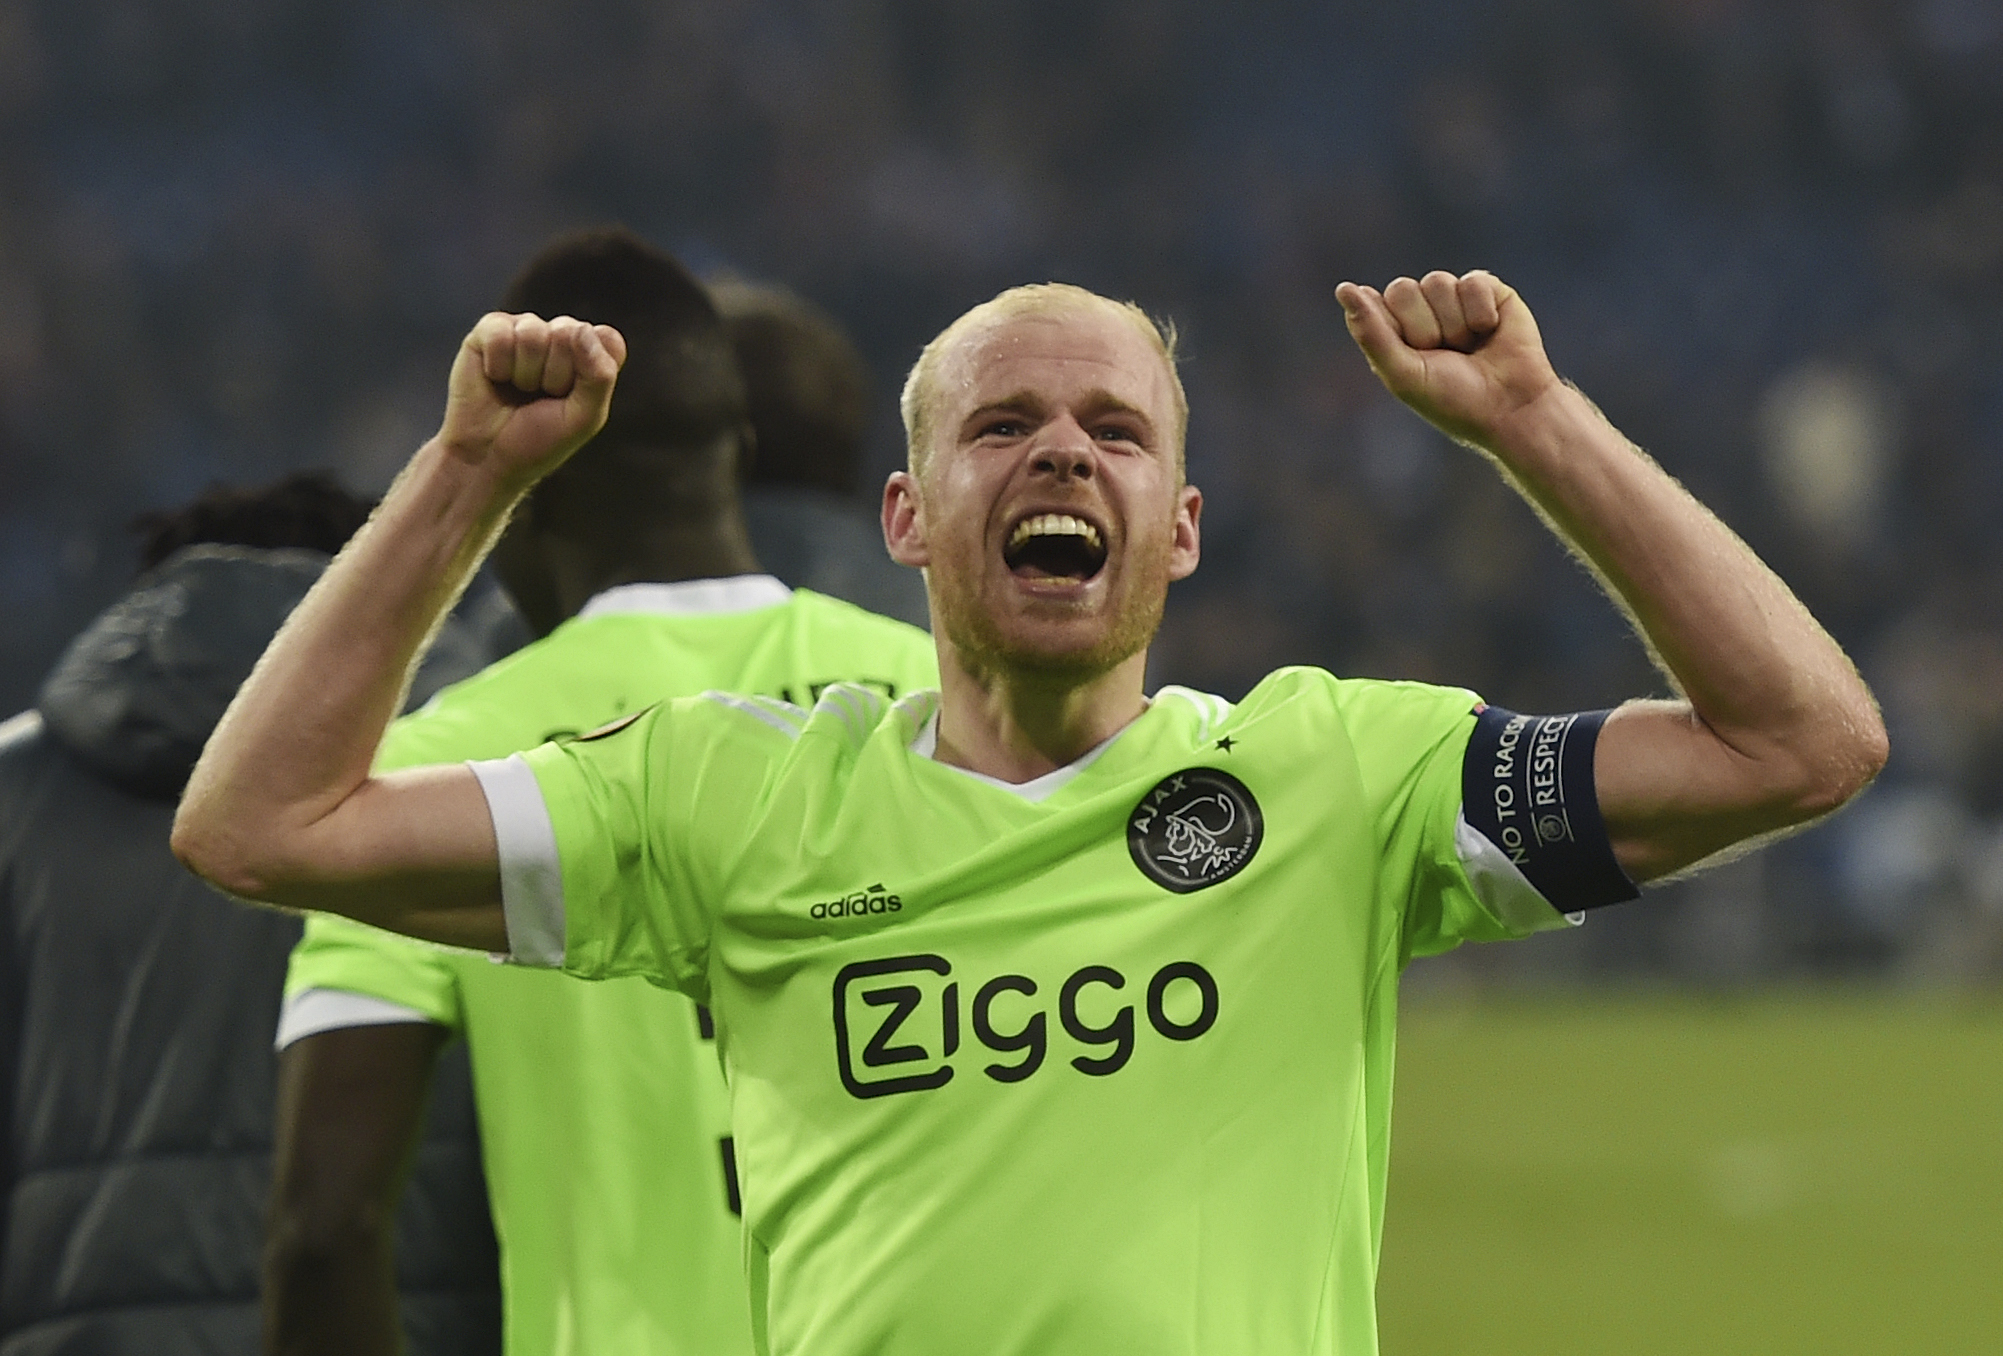 Inter are looking to add one extra midfielder on deadline day, and the candidate with the most steam is currently Davy Klaassen.